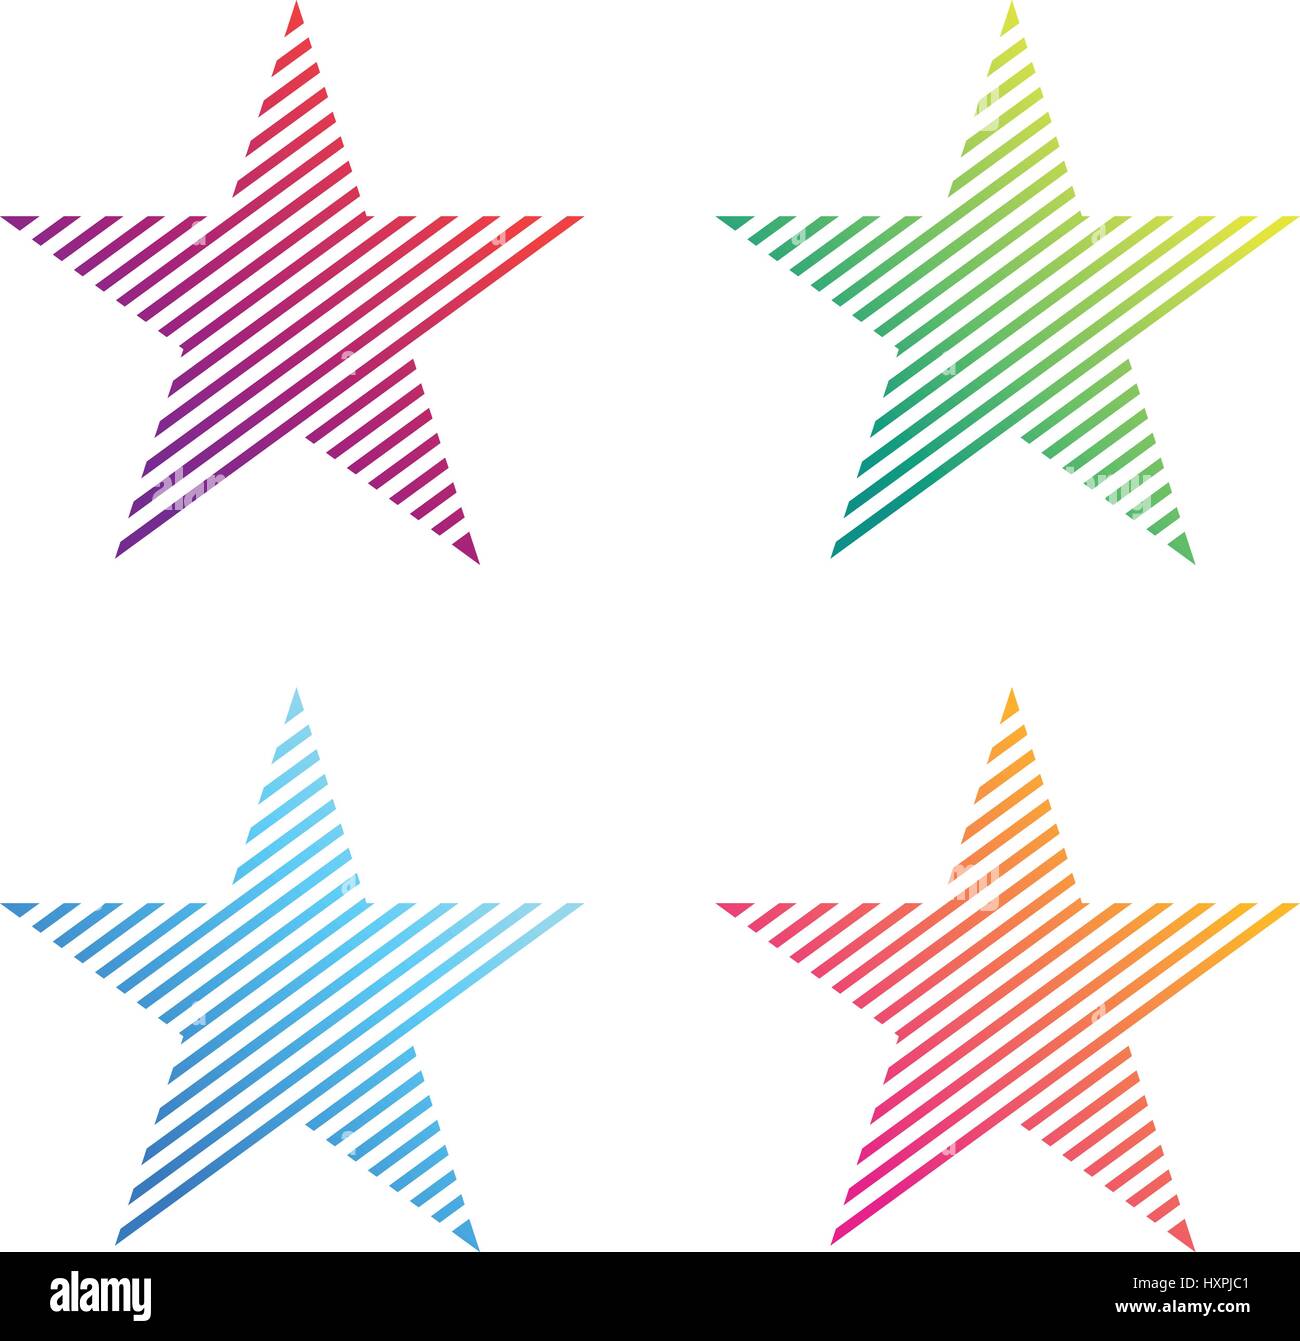 Star And Symbol Design Stock Vector Images Alamy